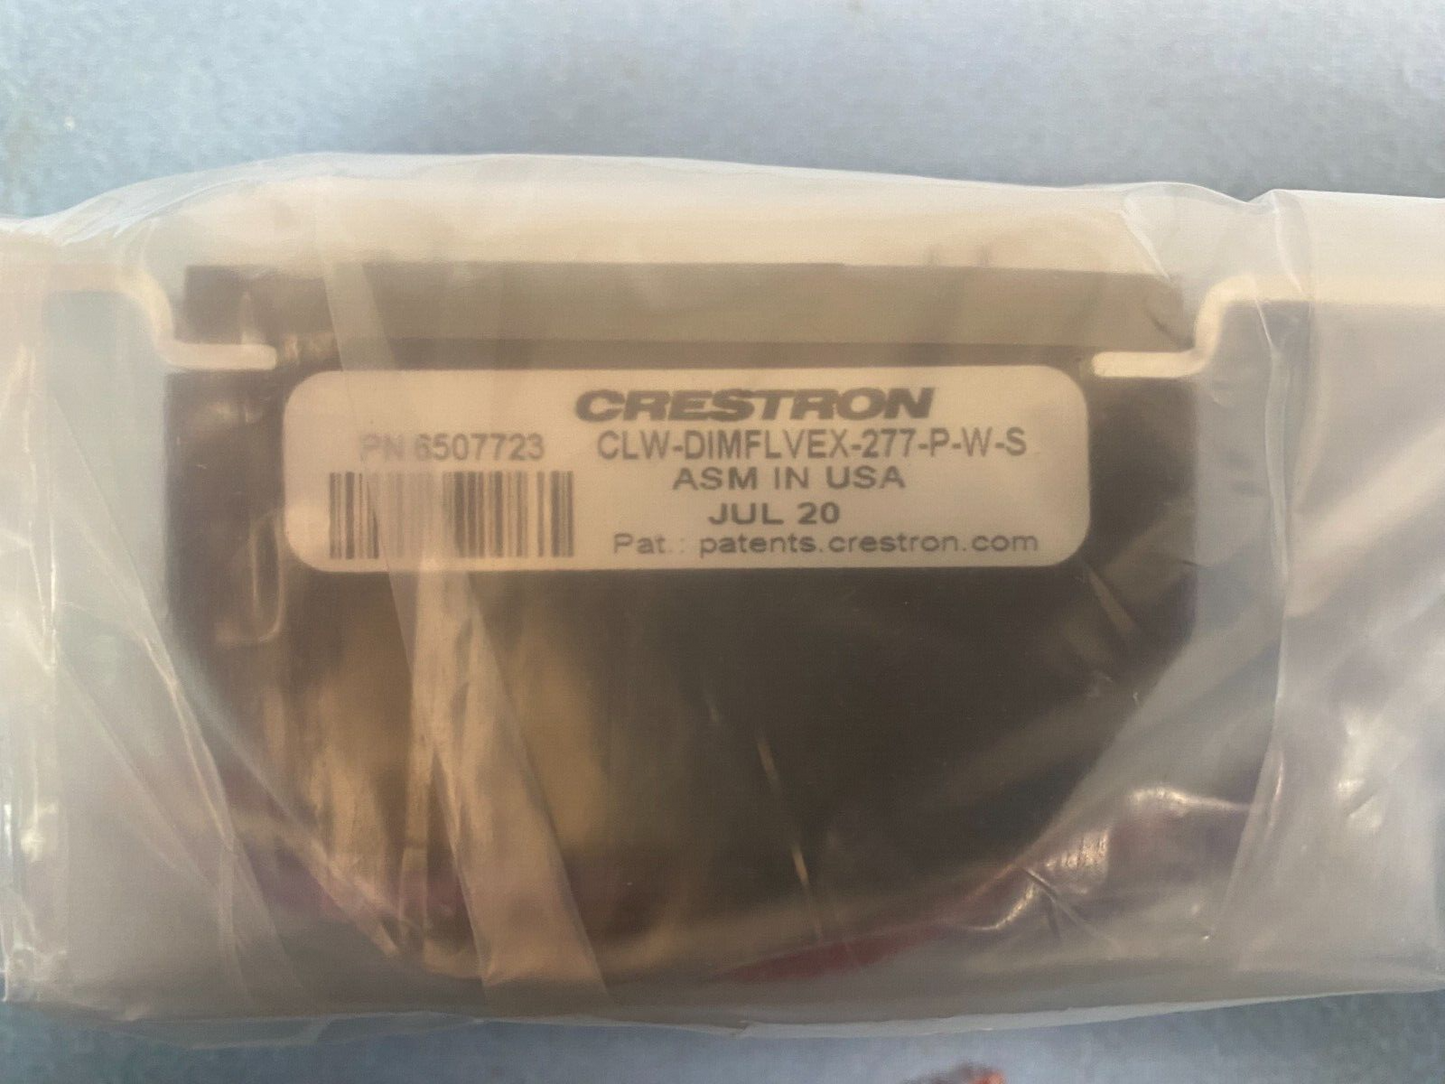 Crestron CLW-DIMFLVEX-277-P-W-S In-Wall 0-10V Dimmer, 277V White Smooth 6507723